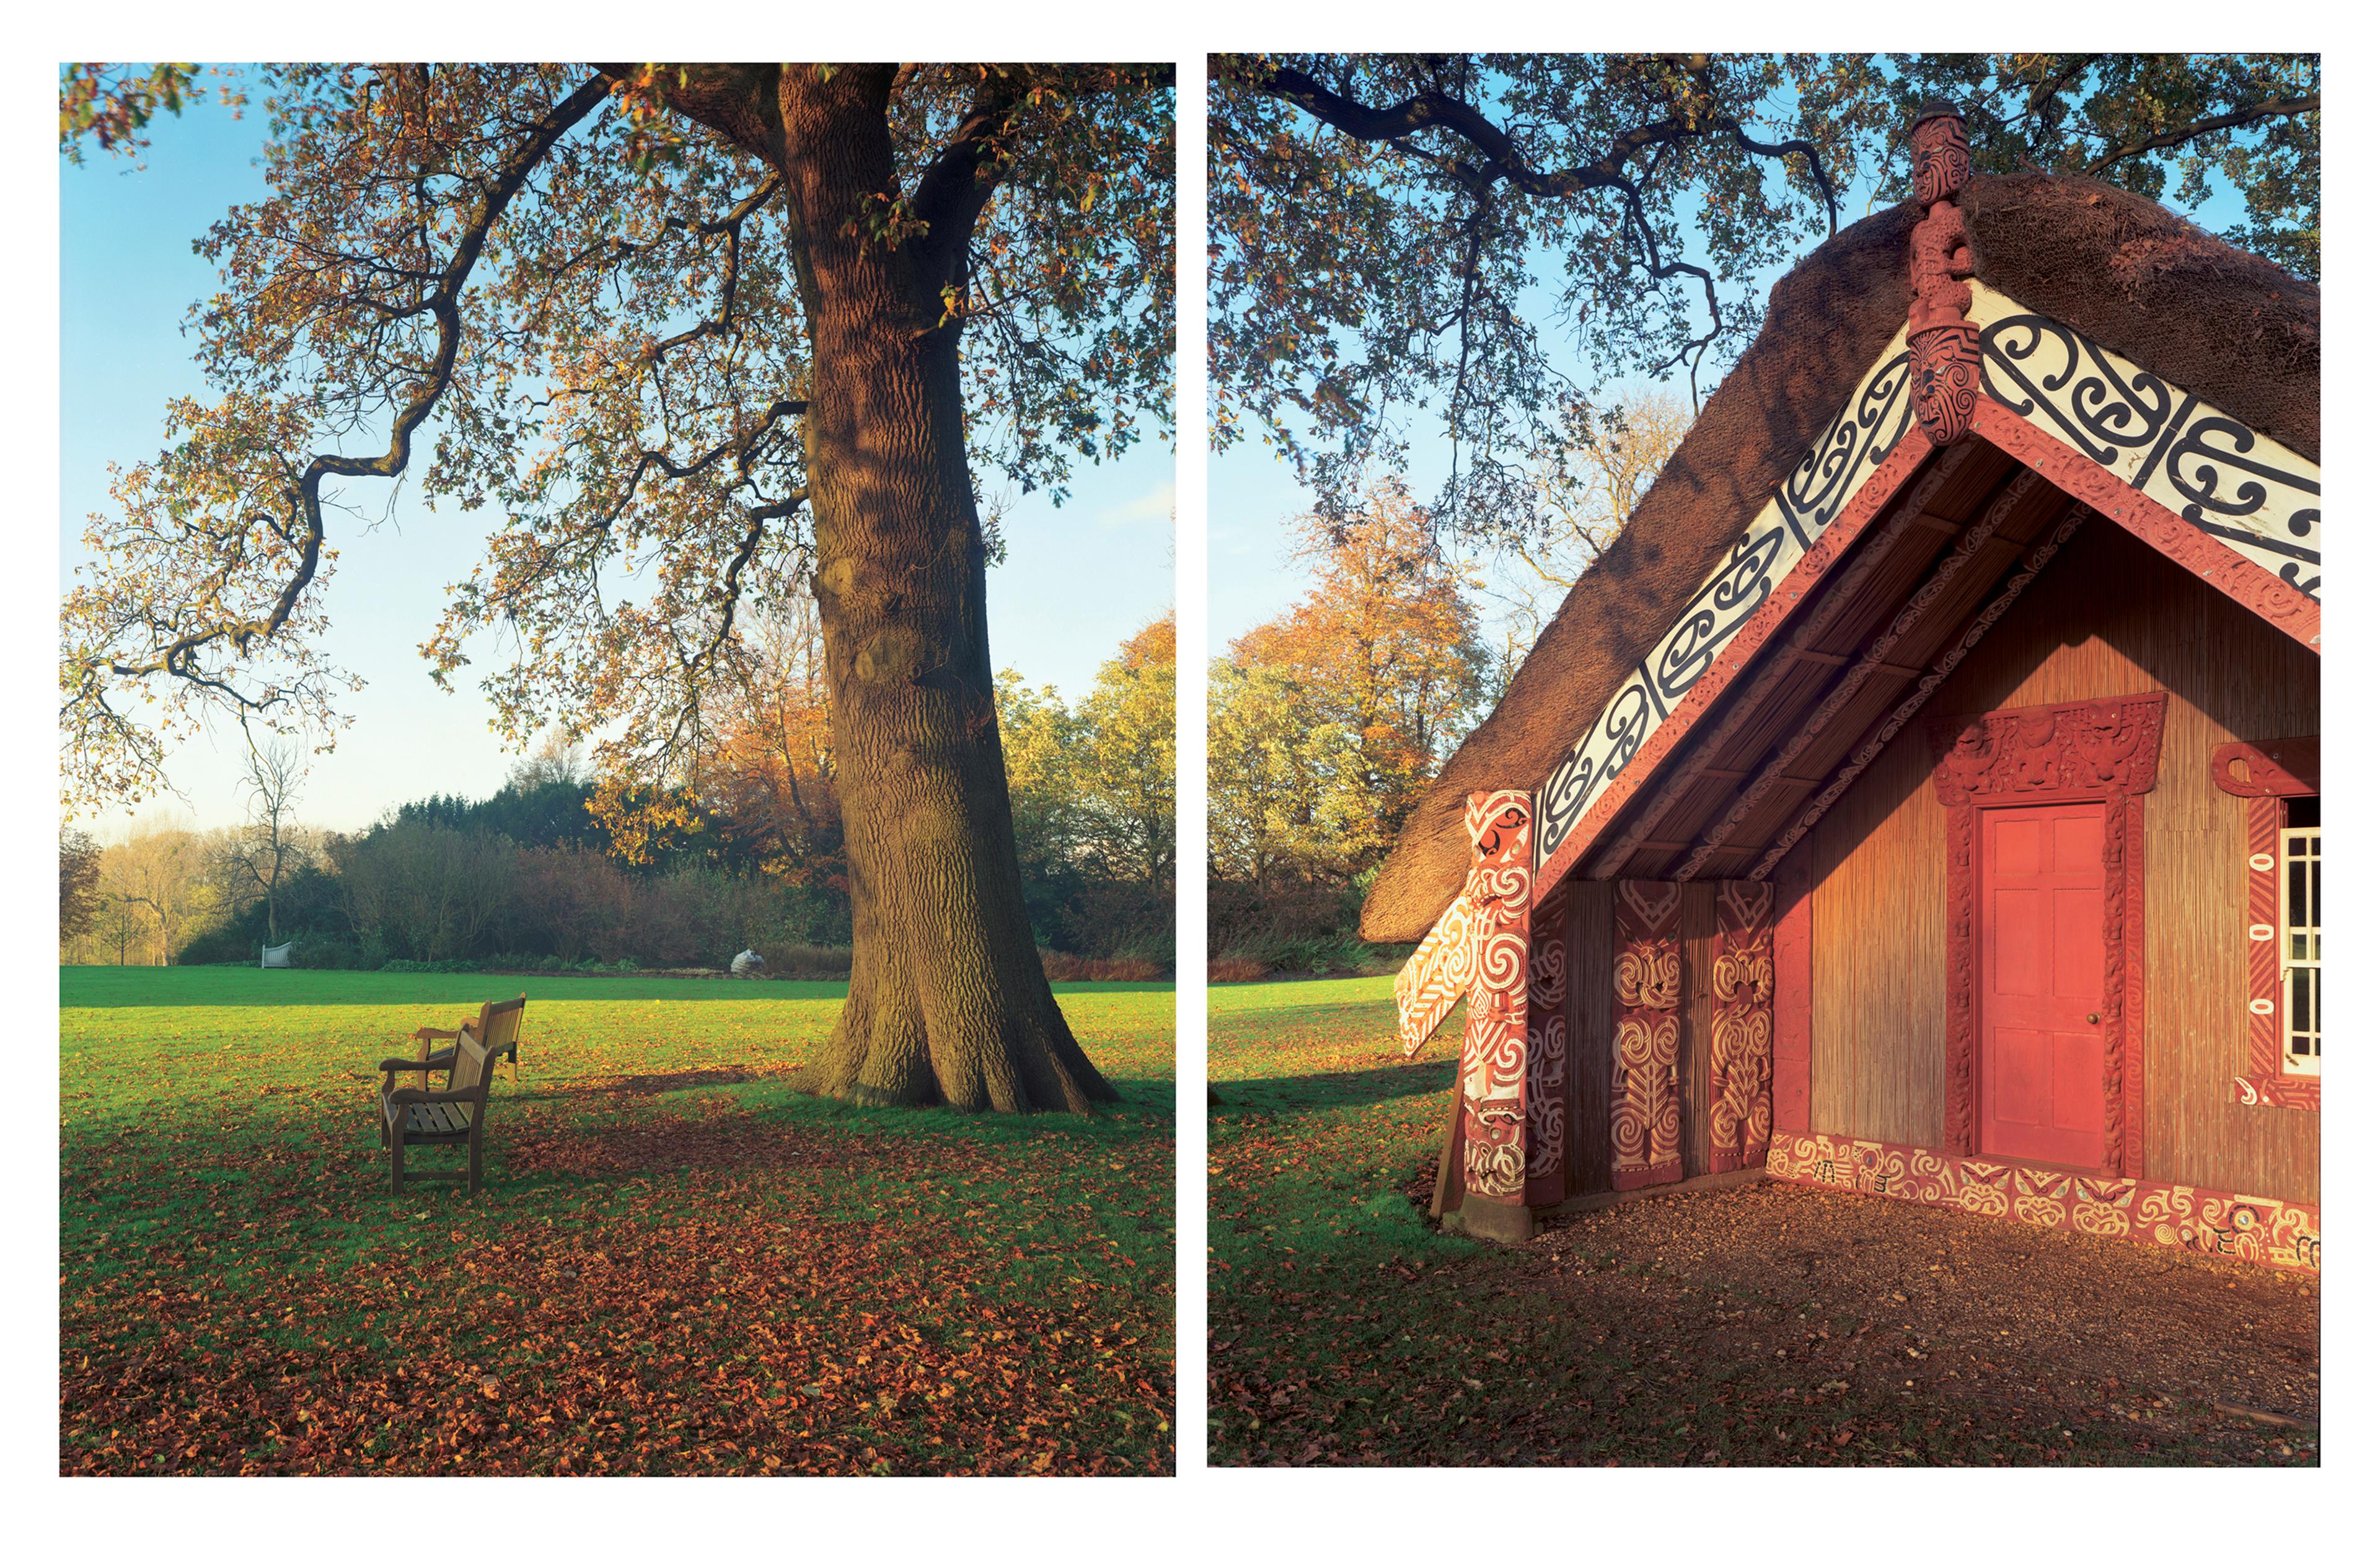 Photograph in two parts showing the carved whare Hinemihi in Clandon Park grounds sited in mowed lawns next to large deciduous tree dropping leaves